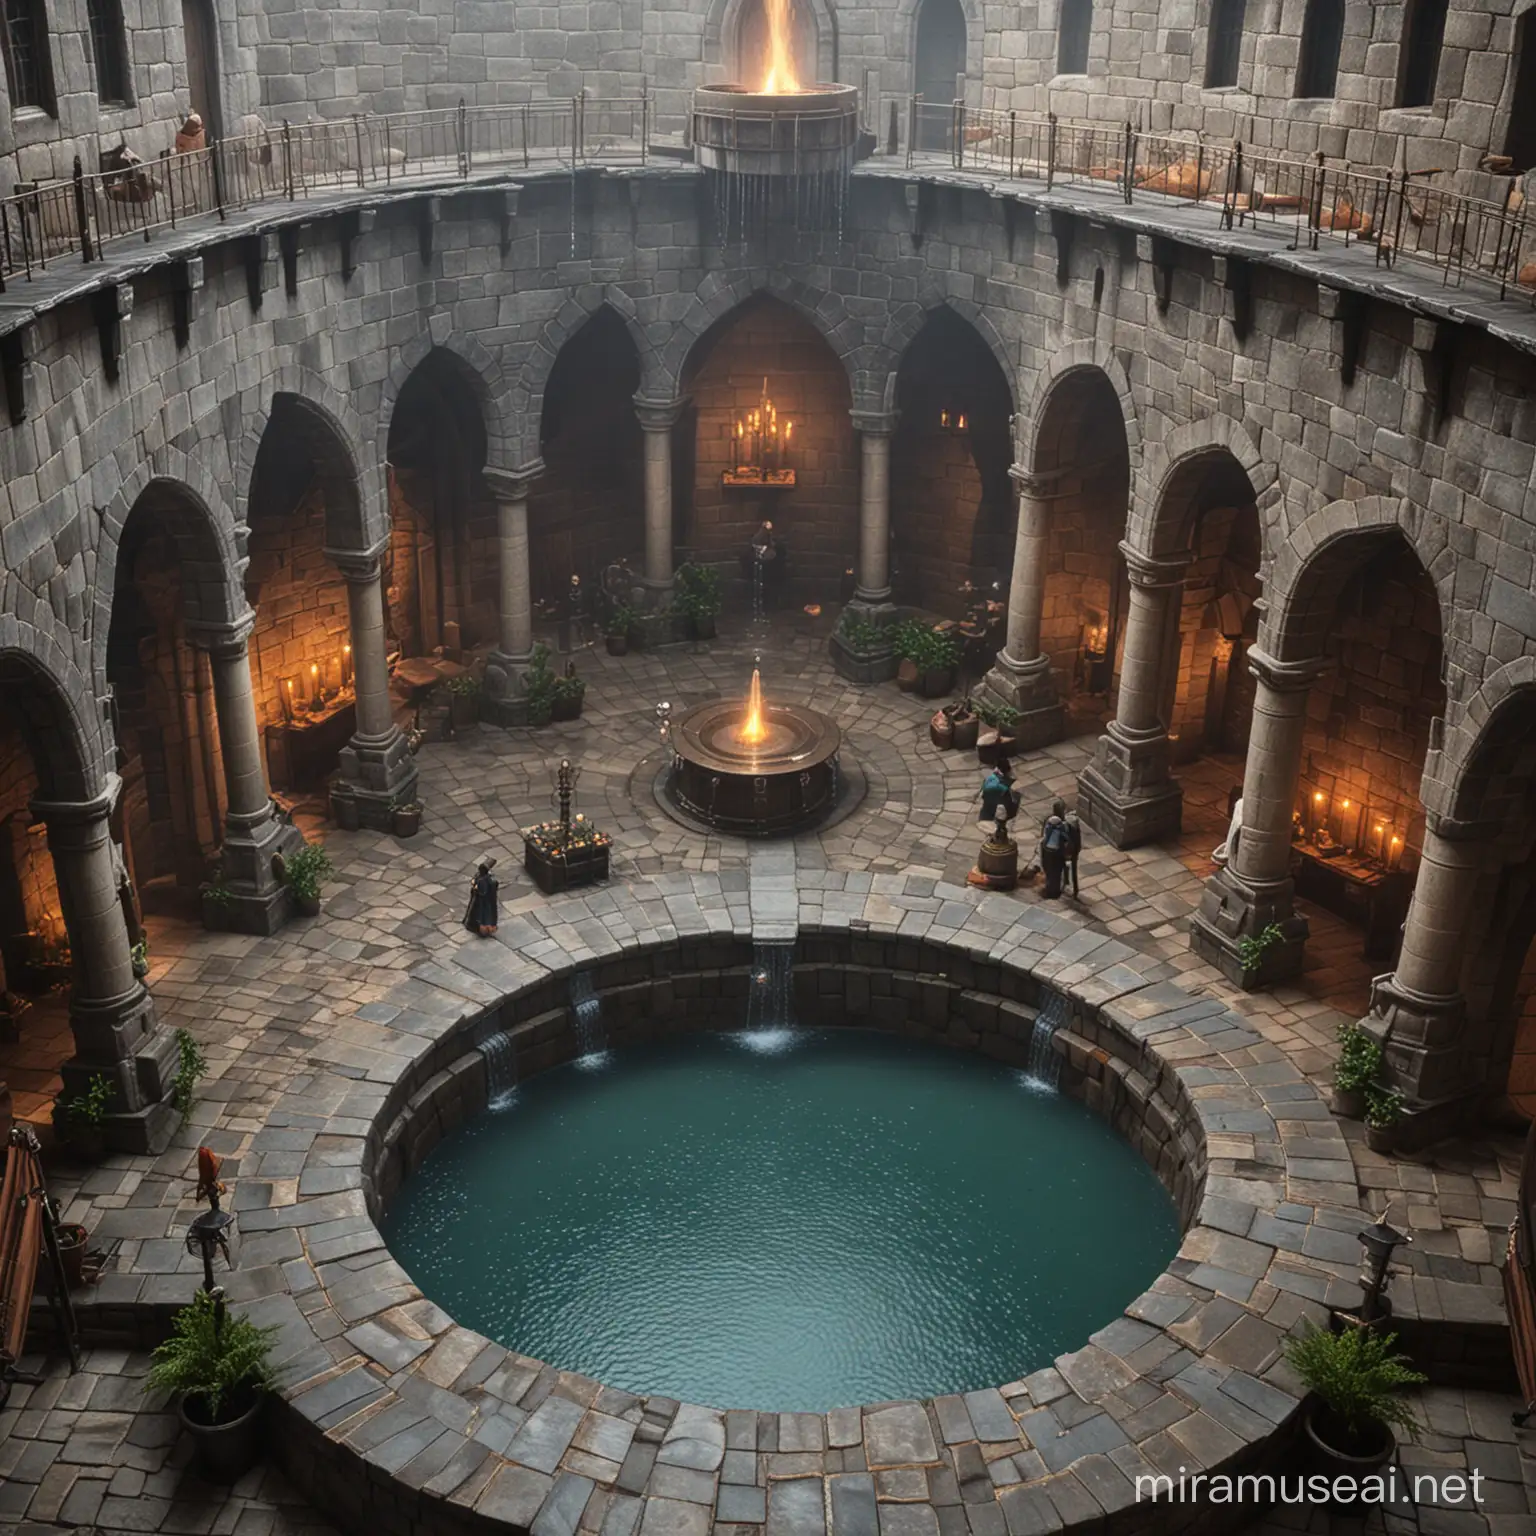 dungeons and dragons, fantasy, castle courtyard with a large fountain in the middle